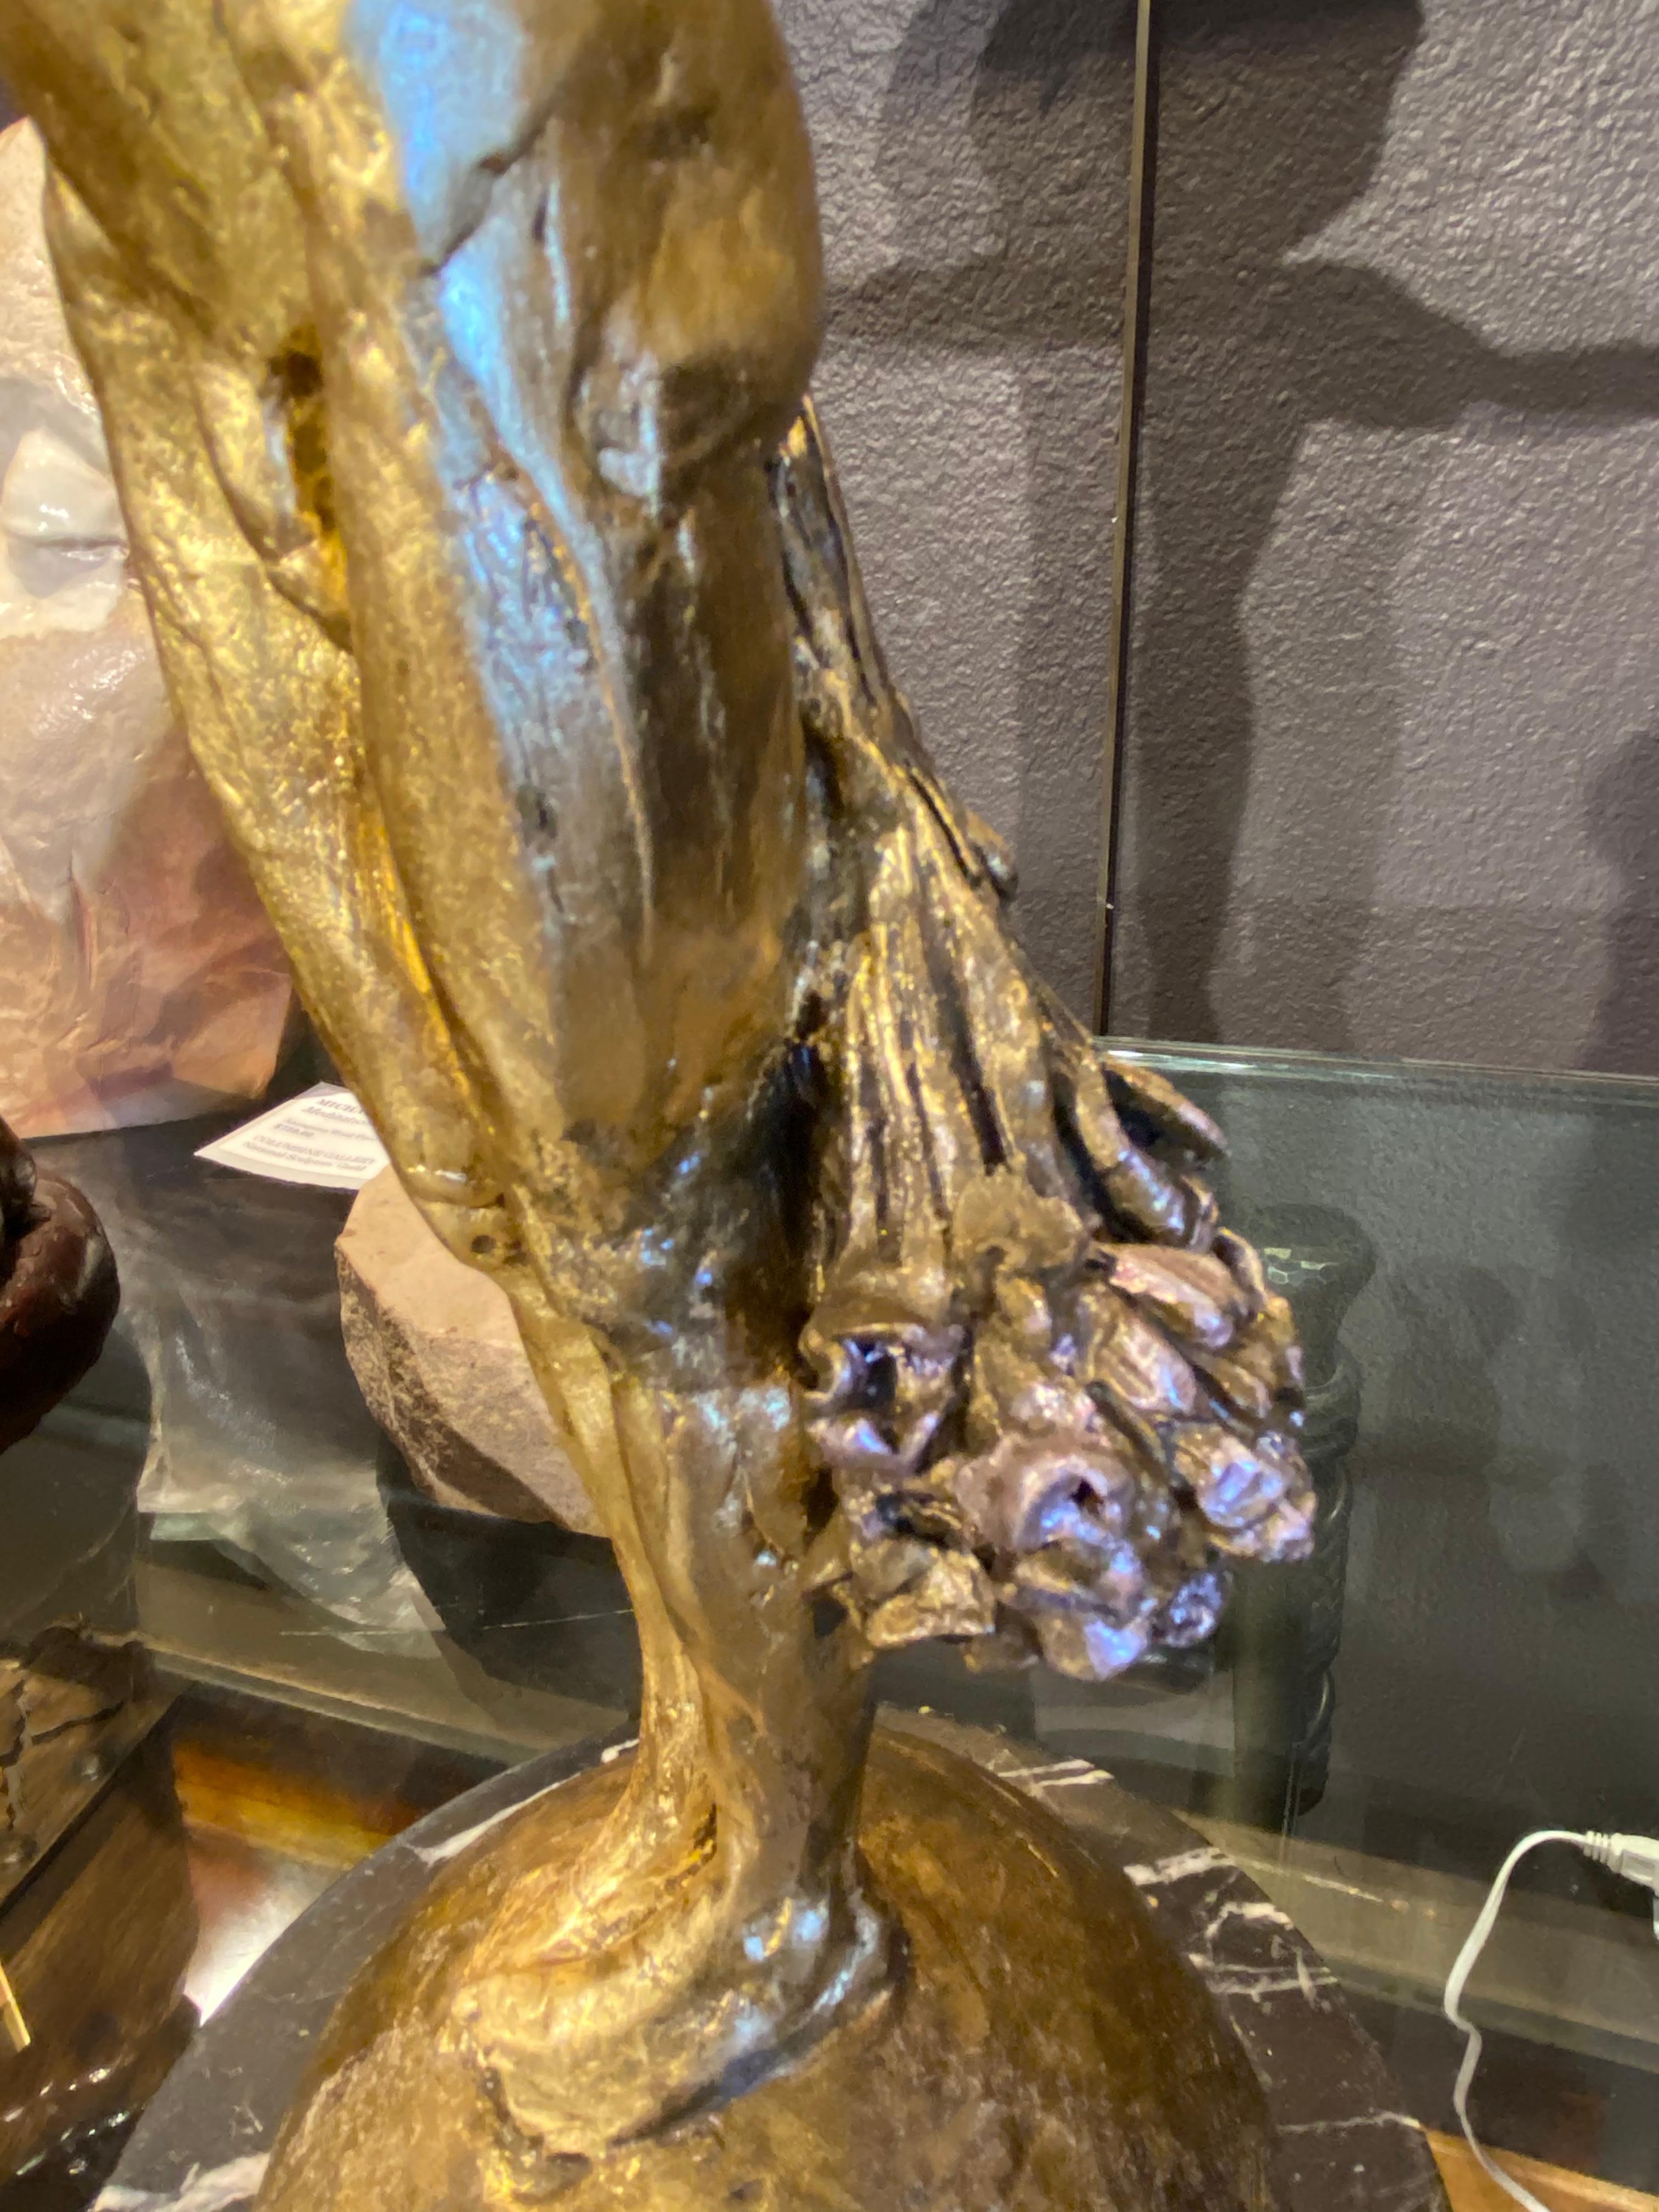 A Hand Once Held by Denny Haskew
Figurative Male Nude Bronze Sculpture with Gold Leaf on granite base
16x7x7